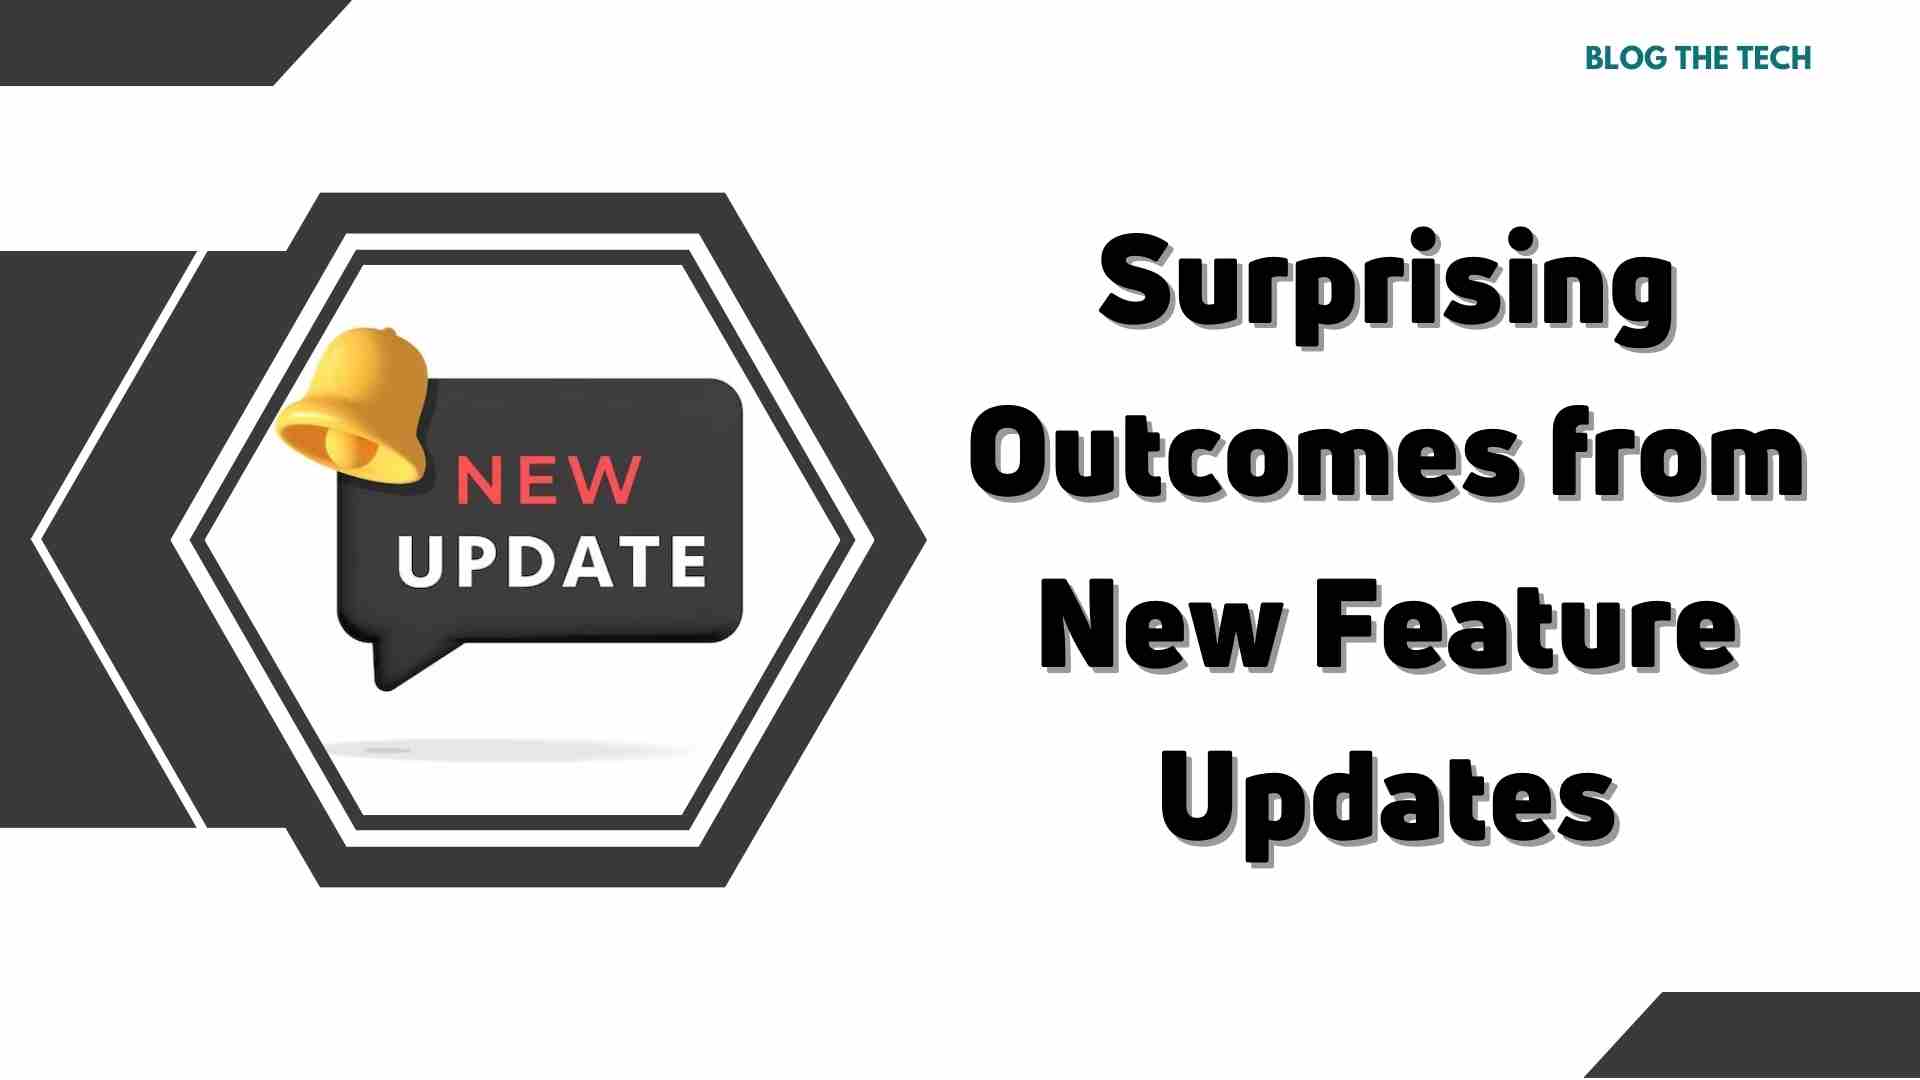 Surprising Outcomes from New Feature Updates